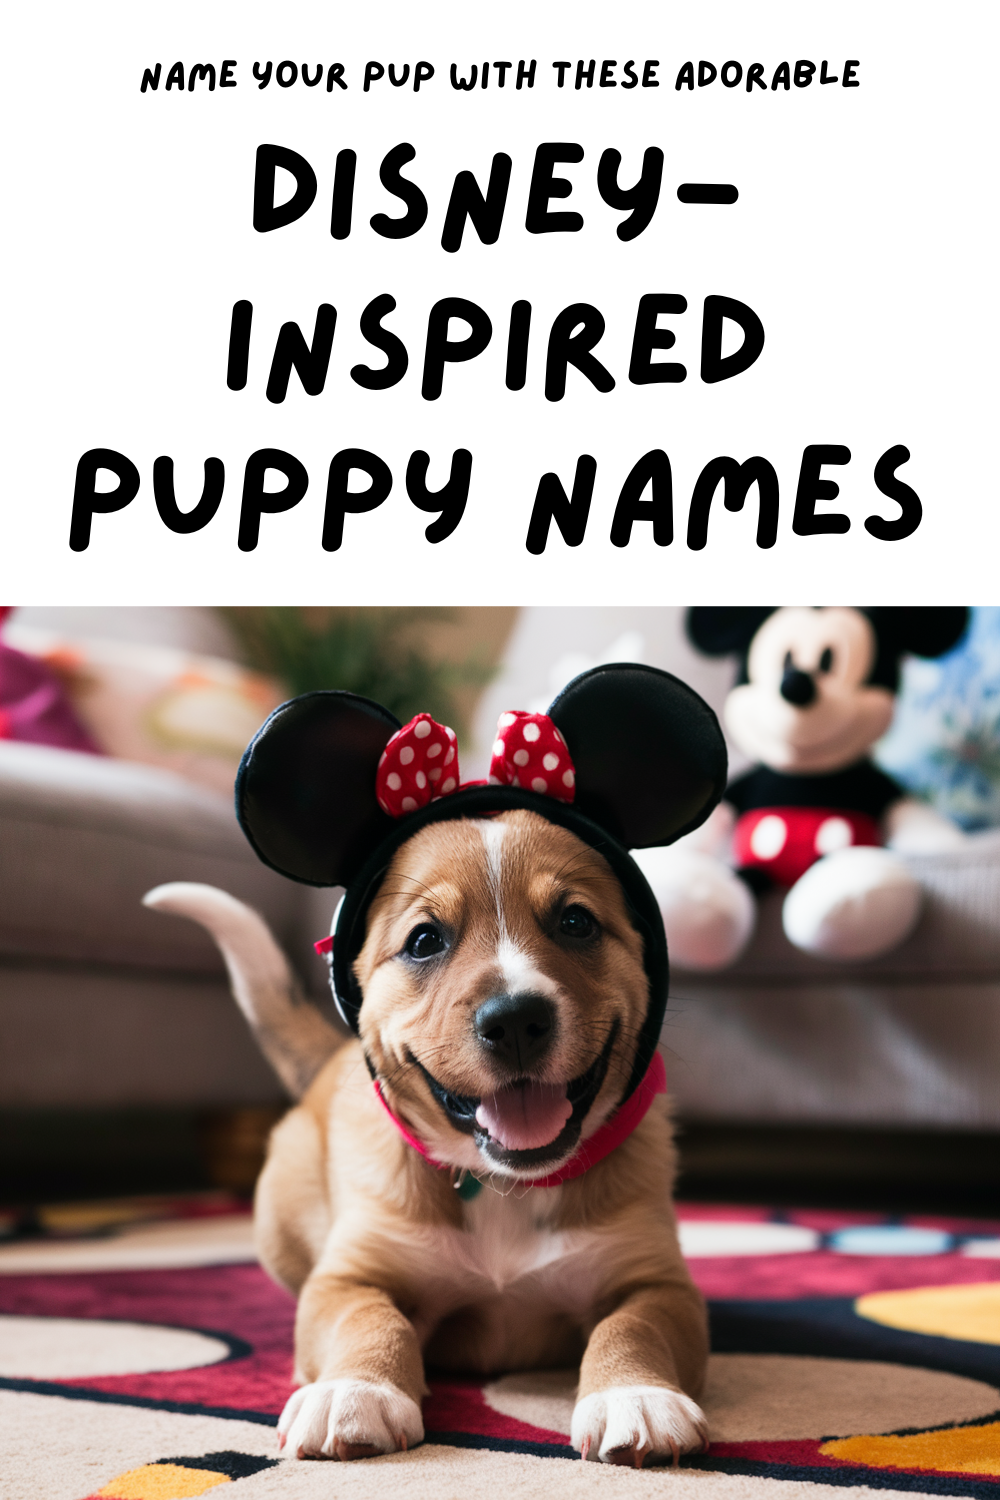 🐶✨ Looking for the perfect name for your new pup? Check out these 100 adorable Disney-inspired names that will bring a touch of magic to your furry friend's life! 🐾❤️